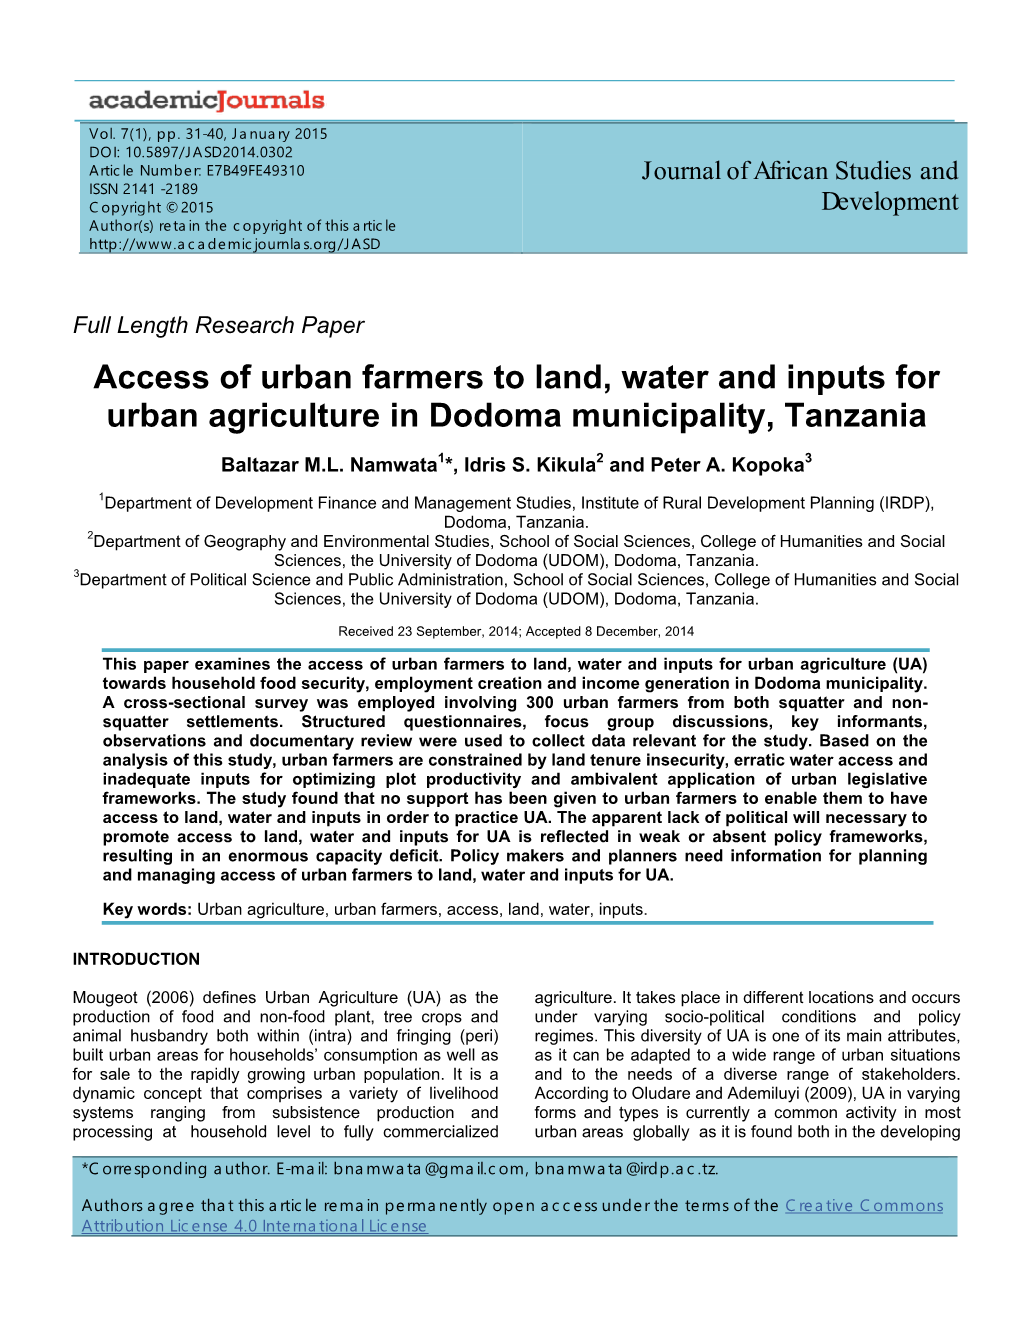 Access of Urban Farmers to Land, Water and Inputs for Urban Agriculture in Dodoma Municipality, Tanzania